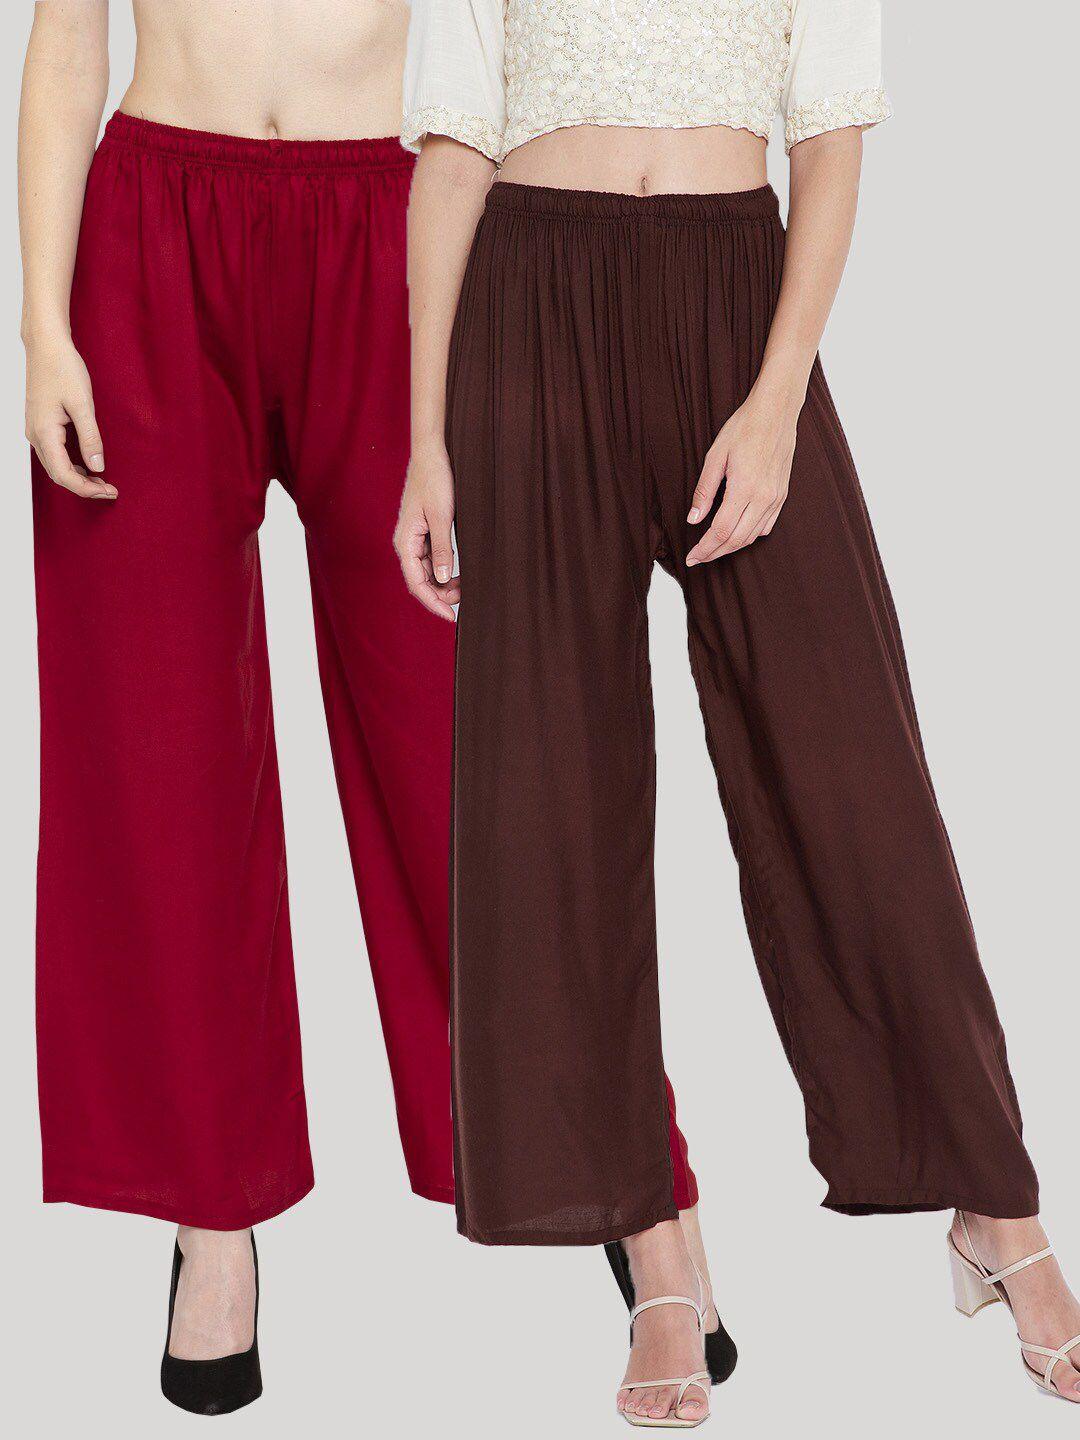 clora creation women pack of 2 brown & maroon 2 ethnic palazzos